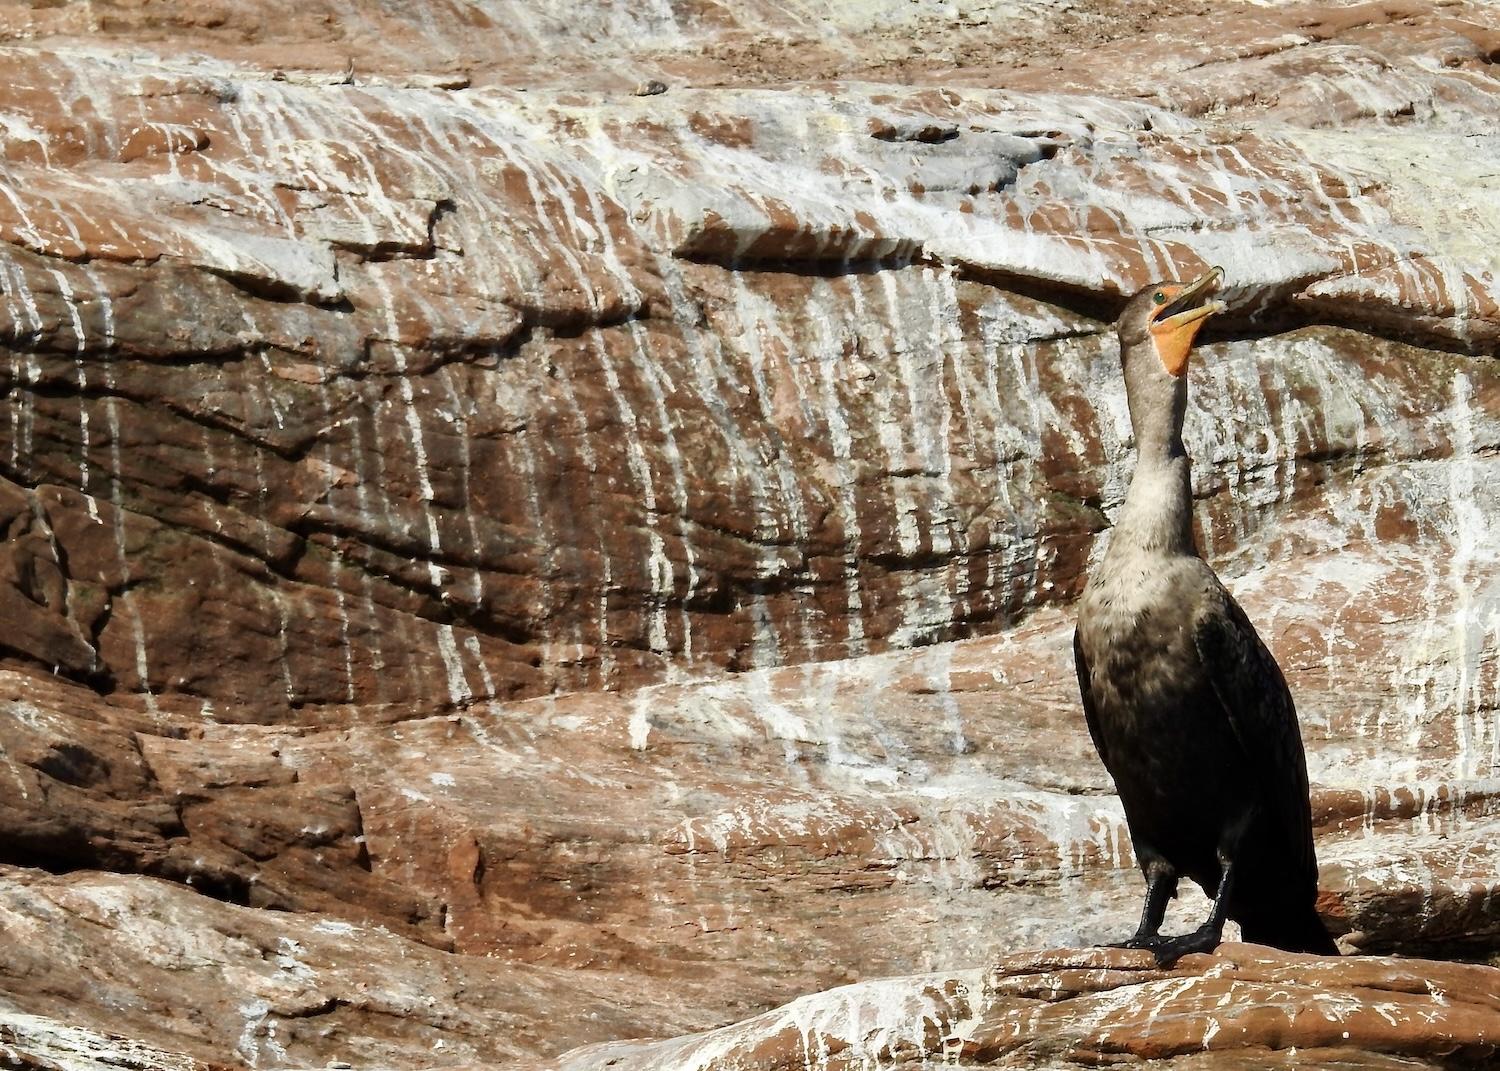 Cormorants "paint" the rocks white with their poop — a strangely beautiful site  in the Magdalen Islands.